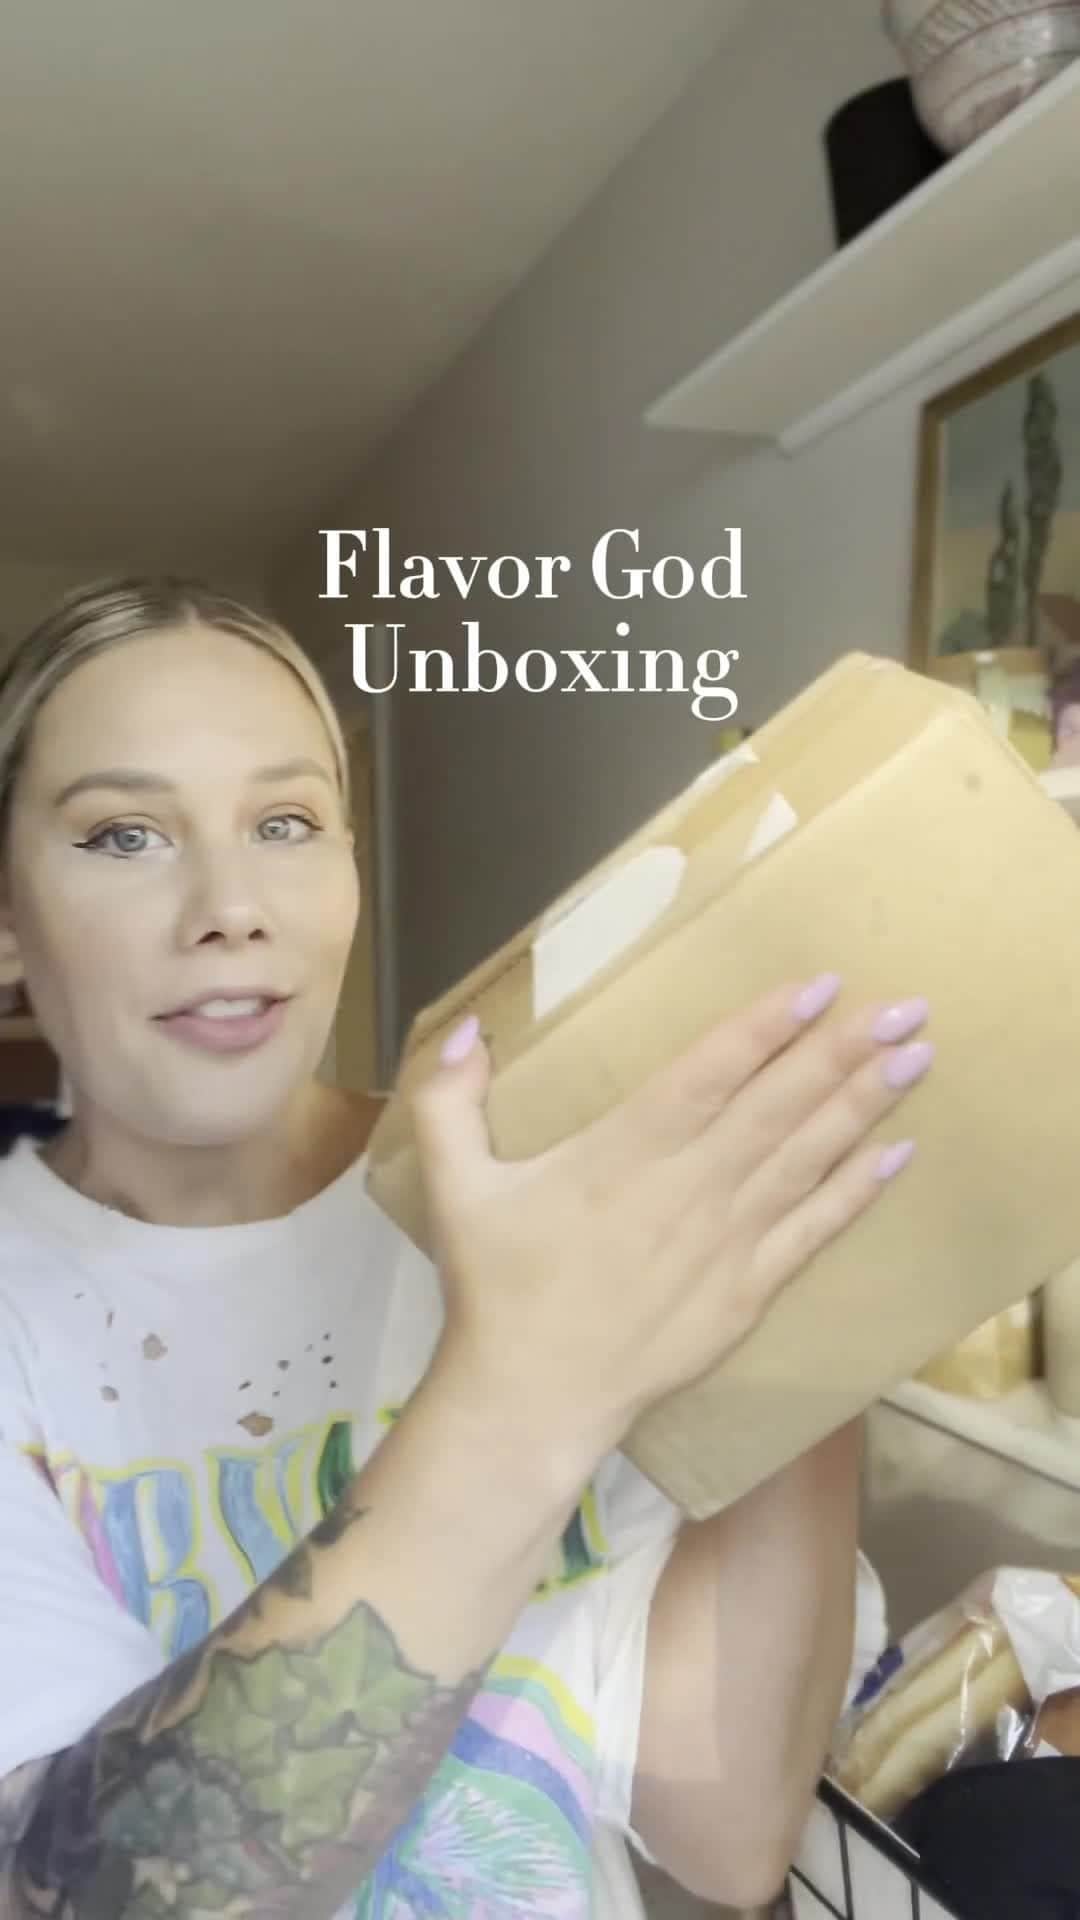 Flavorgod Seasoningsのインスタグラム：「Unboxing a #Flavorgod Package by Customer @lauren_in_louisville 📦⁠ -⁠ Add delicious flavors to any meal!⬇⁠ Click the link in my bio @flavorgod⁠ ✅www.flavorgod.com⁠ -⁠ Flavor God Seasonings are:⁠ ➡ZERO CALORIES PER SERVING⁠ ➡MADE FRESH⁠ ➡MADE LOCALLY IN US⁠ ➡FREE GIFTS AT CHECKOUT⁠ ➡GLUTEN FREE⁠ ➡#PALEO & #KETO FRIENDLY⁠ -⁠ #breakfast #fitness #food #foodporn #foodie #instafood #foodphotography #foodstagram #yummy #instagood  #foodies #tasty #cooking #instadaily #lunch #healthy #seasonings #flavorgod #lowsodium #glutenfree #dairyfree」